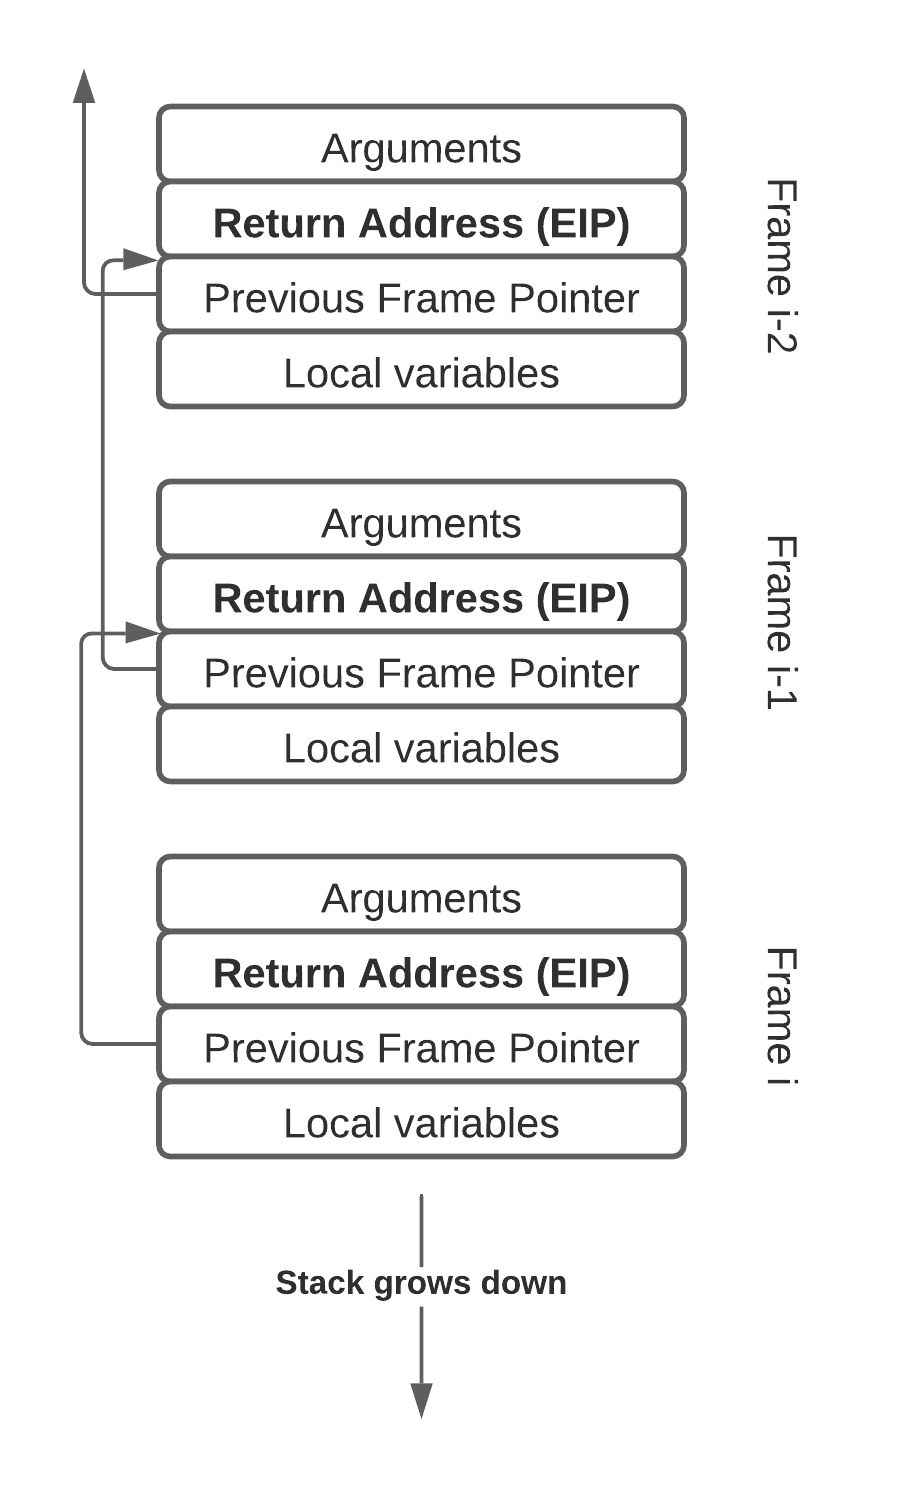 Diagram showing a program's call stack